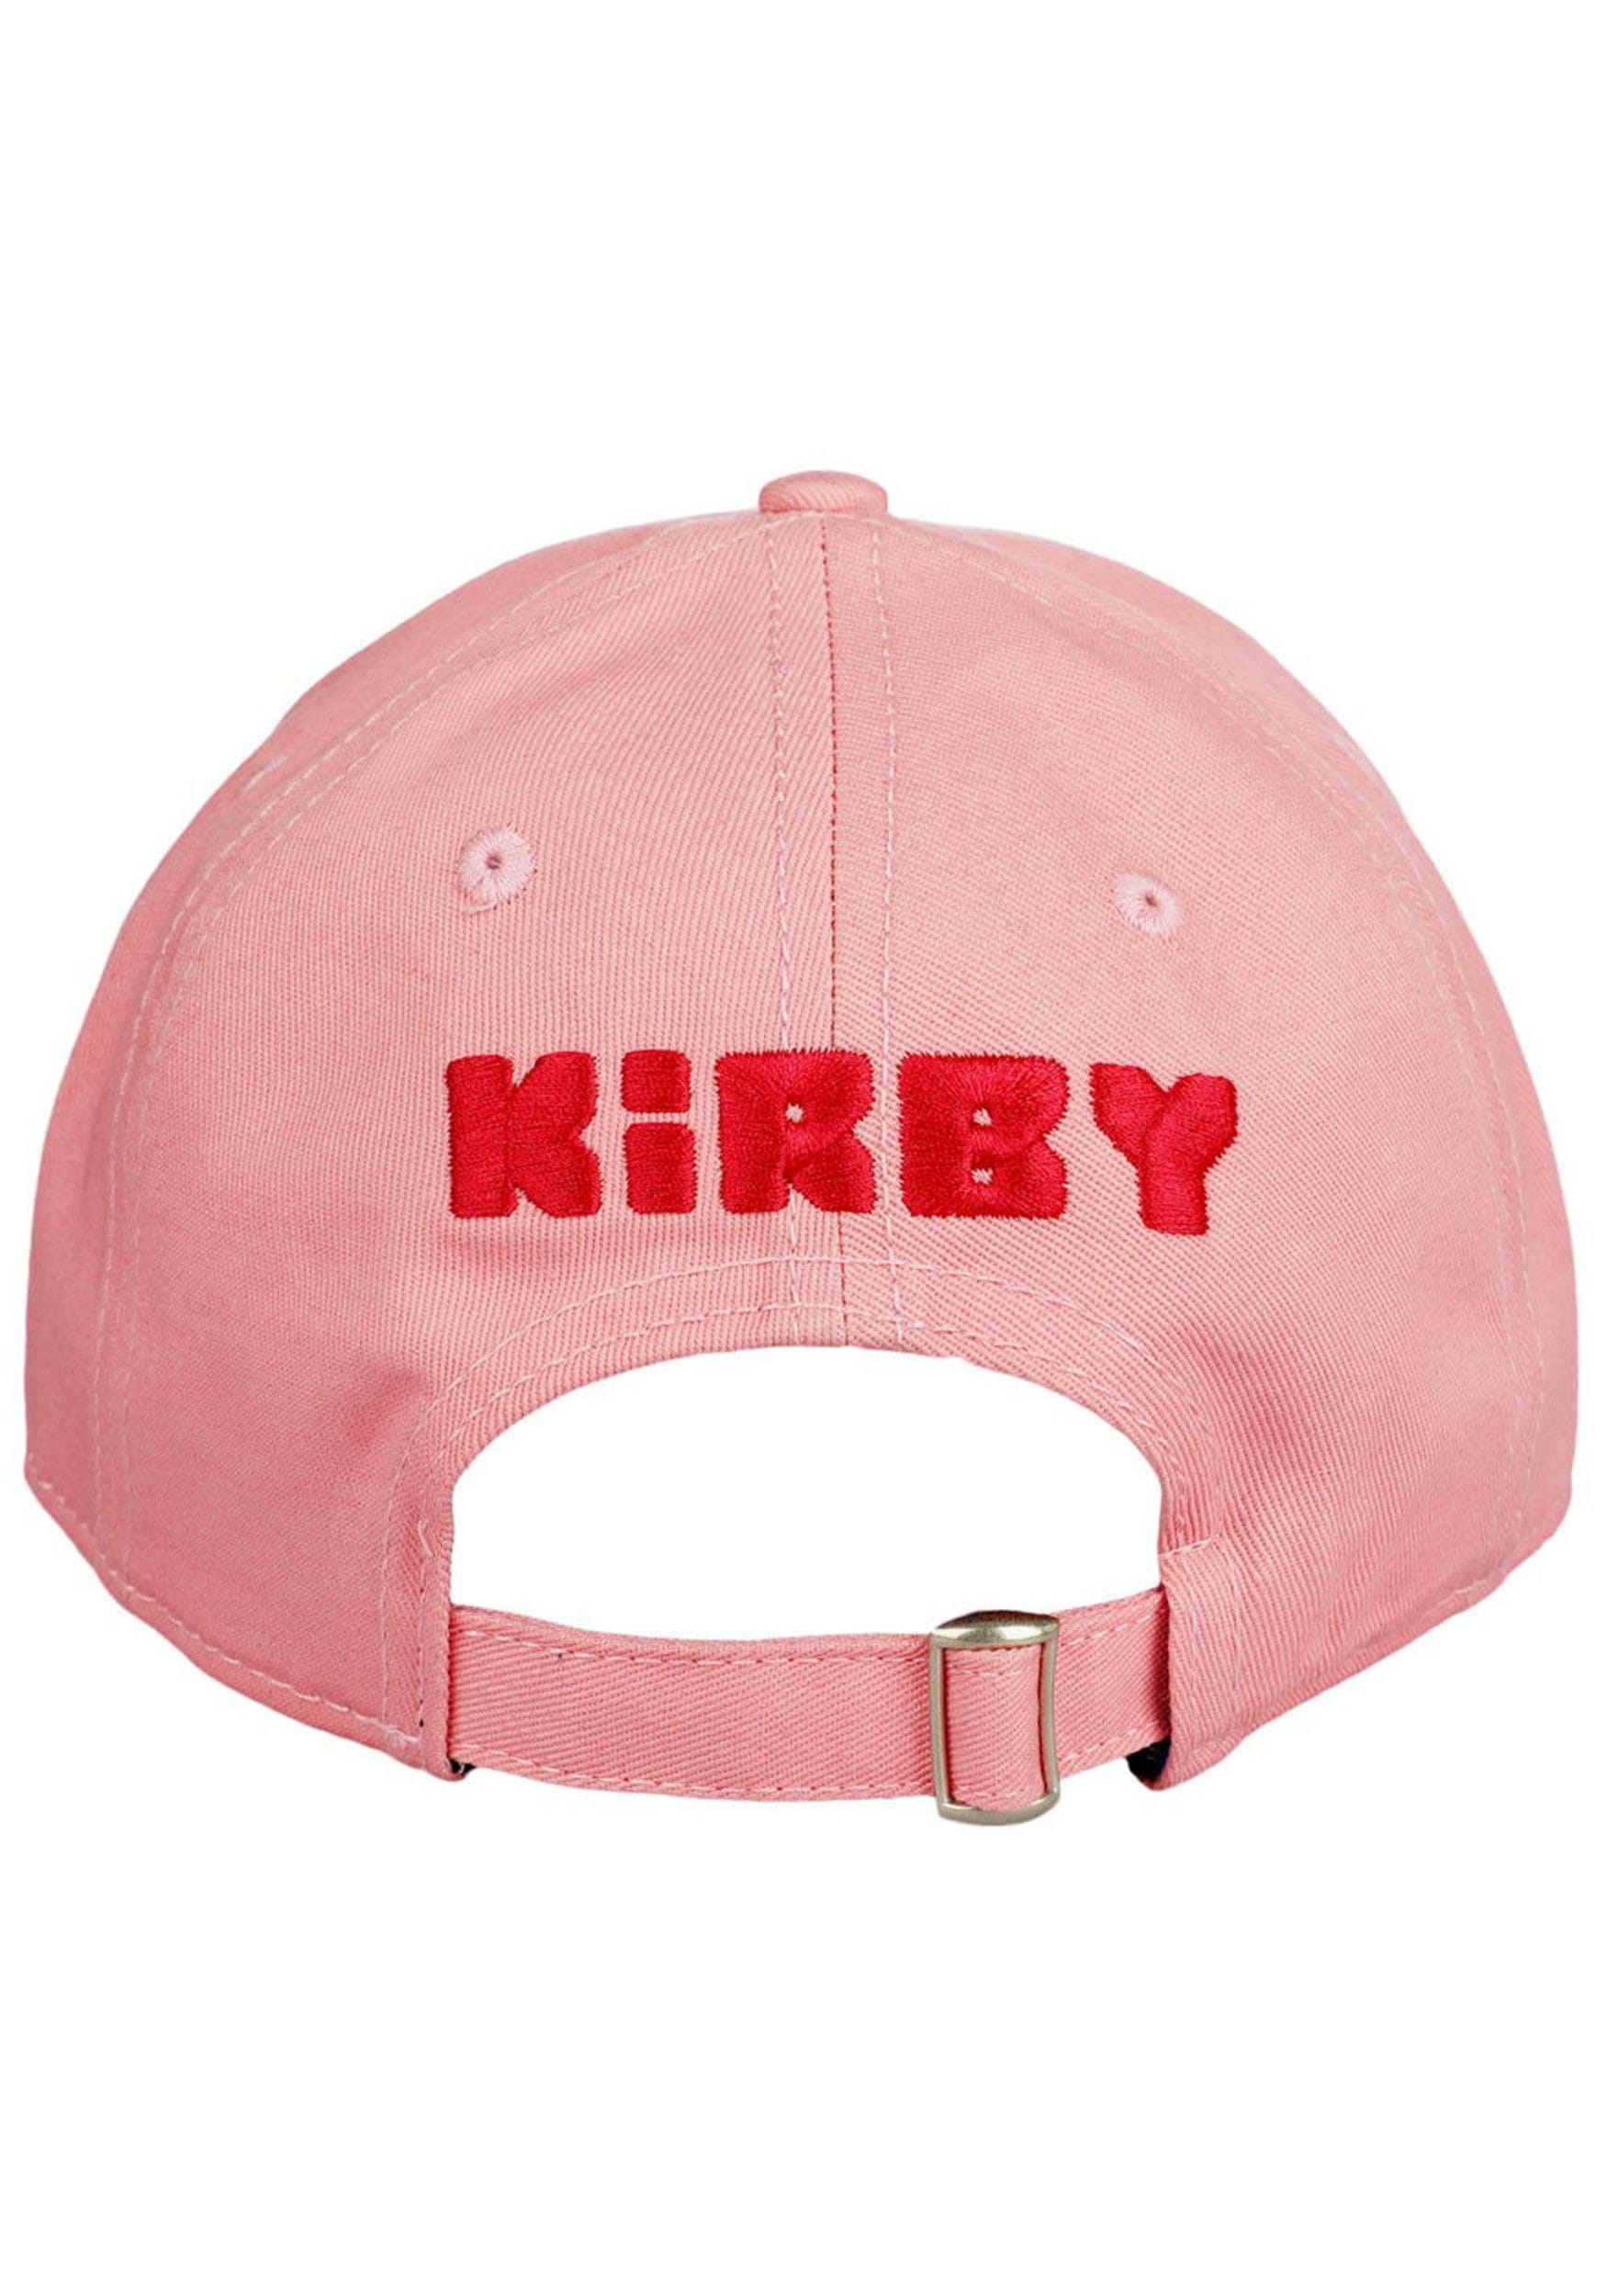 Kirby - Big Face Embroidered Hat